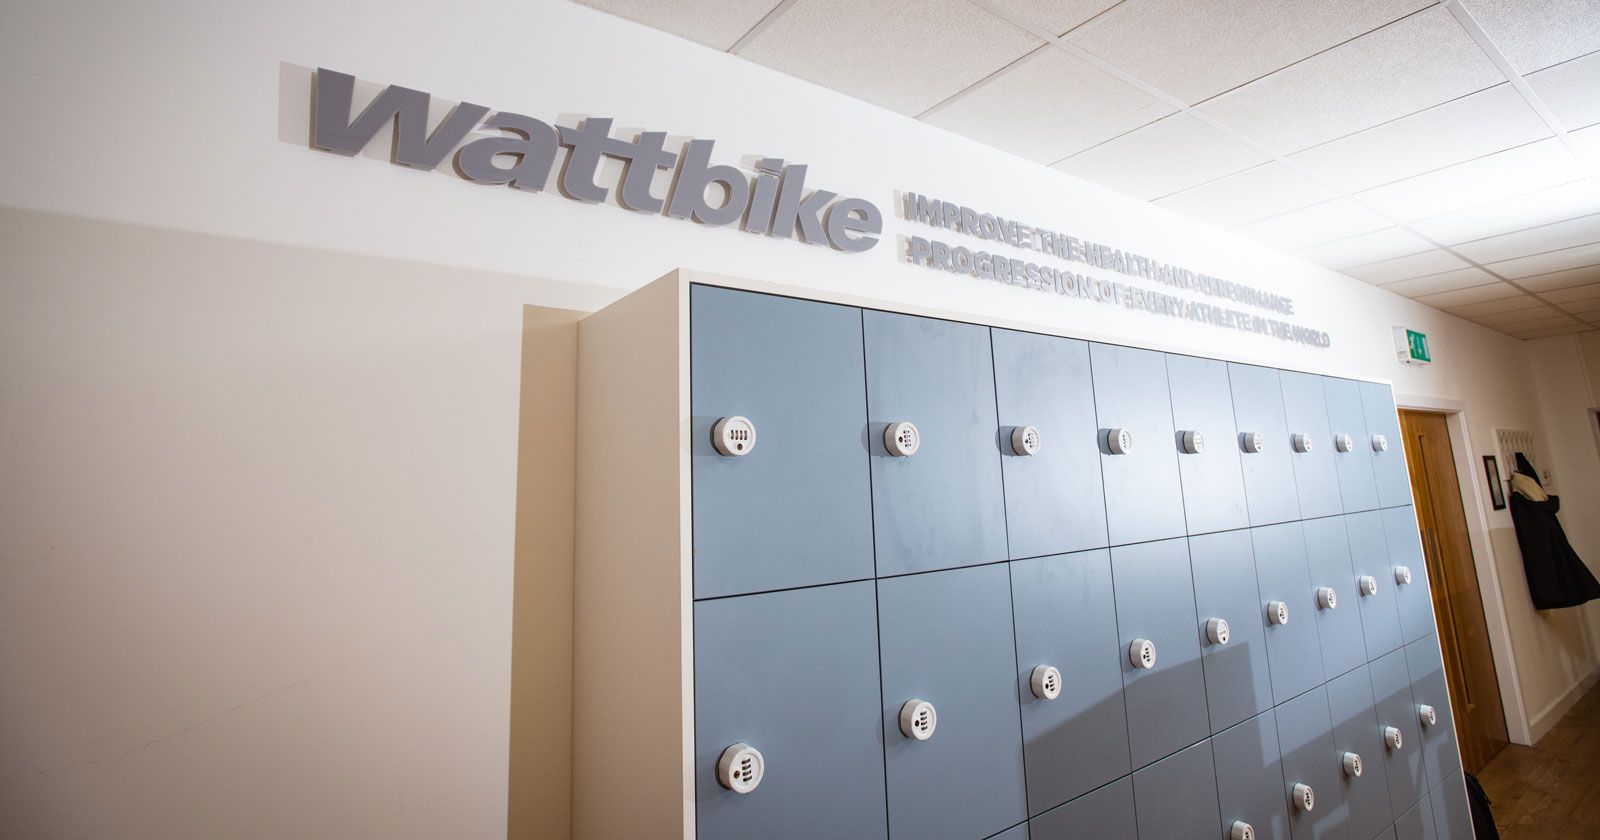 Wattbike Bespoke Lockers Designed and Installed by APSS Joinery